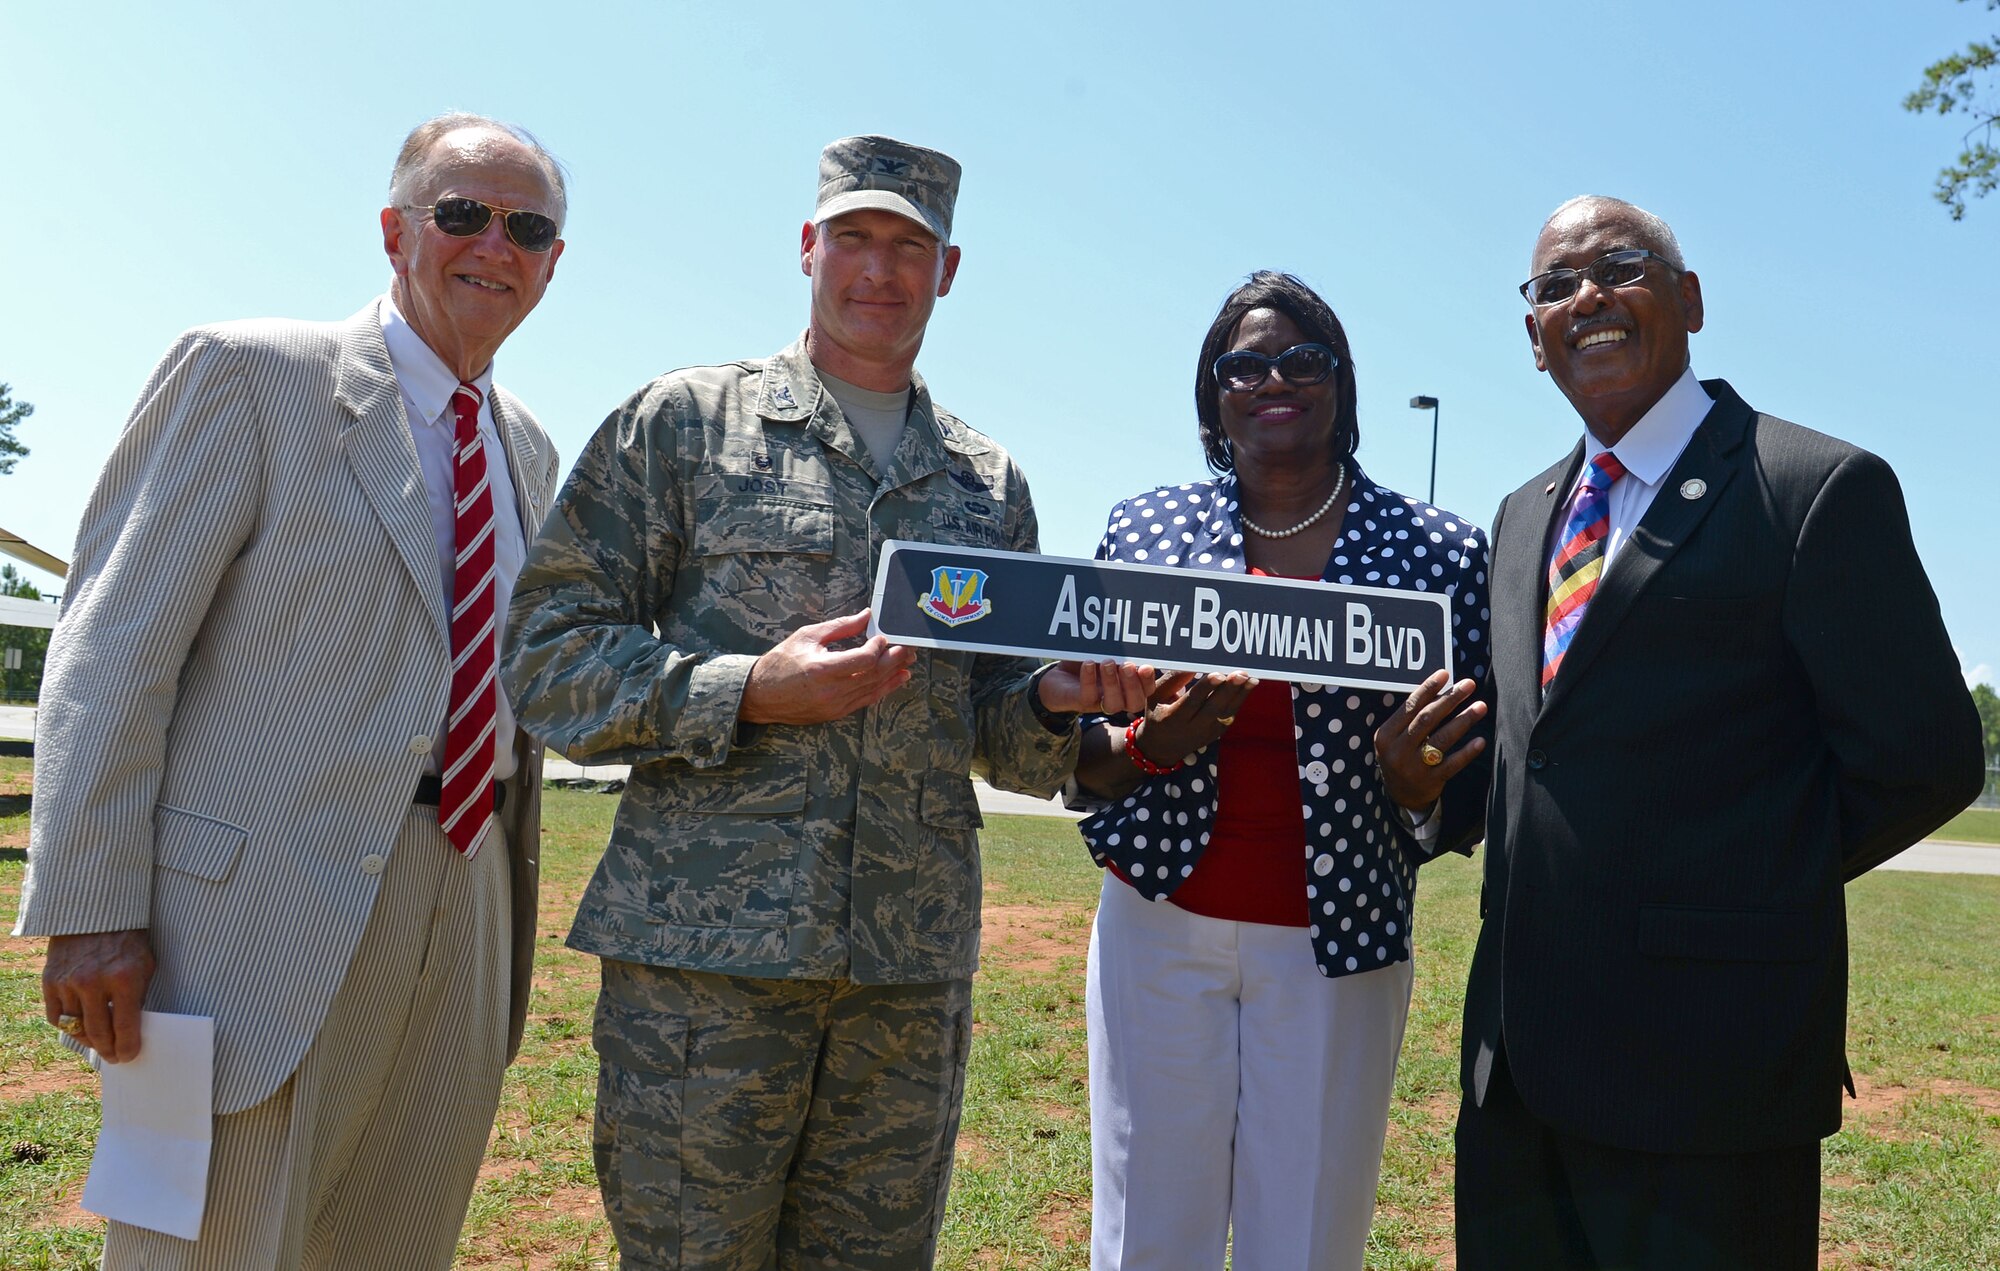 (From left) Mayor Joseph McElveen, City of Sumter mayor, U.S. Air Force Col. Stephen Jost, 20th Fighter Wing commander, Vivian McGhaney, chair of Sumter County Council, and Rev. Ralph Canty, step-brother of U.S. Army Air Corps 1st Lt. Leroy Bowman, hold a street sign during a street renaming ceremony at Shaw Air Force Base, S.C., July 14, 2016. The ceremony was held in honor of Bowman, who passed away in 2014, and Lt. Col. Willie Ashley, who passed away in 1984, both of whom were Tuskegee Airmen and City of Sumter natives. (U.S. Air Force photo by Airman 1st Class Christopher Maldonado) 